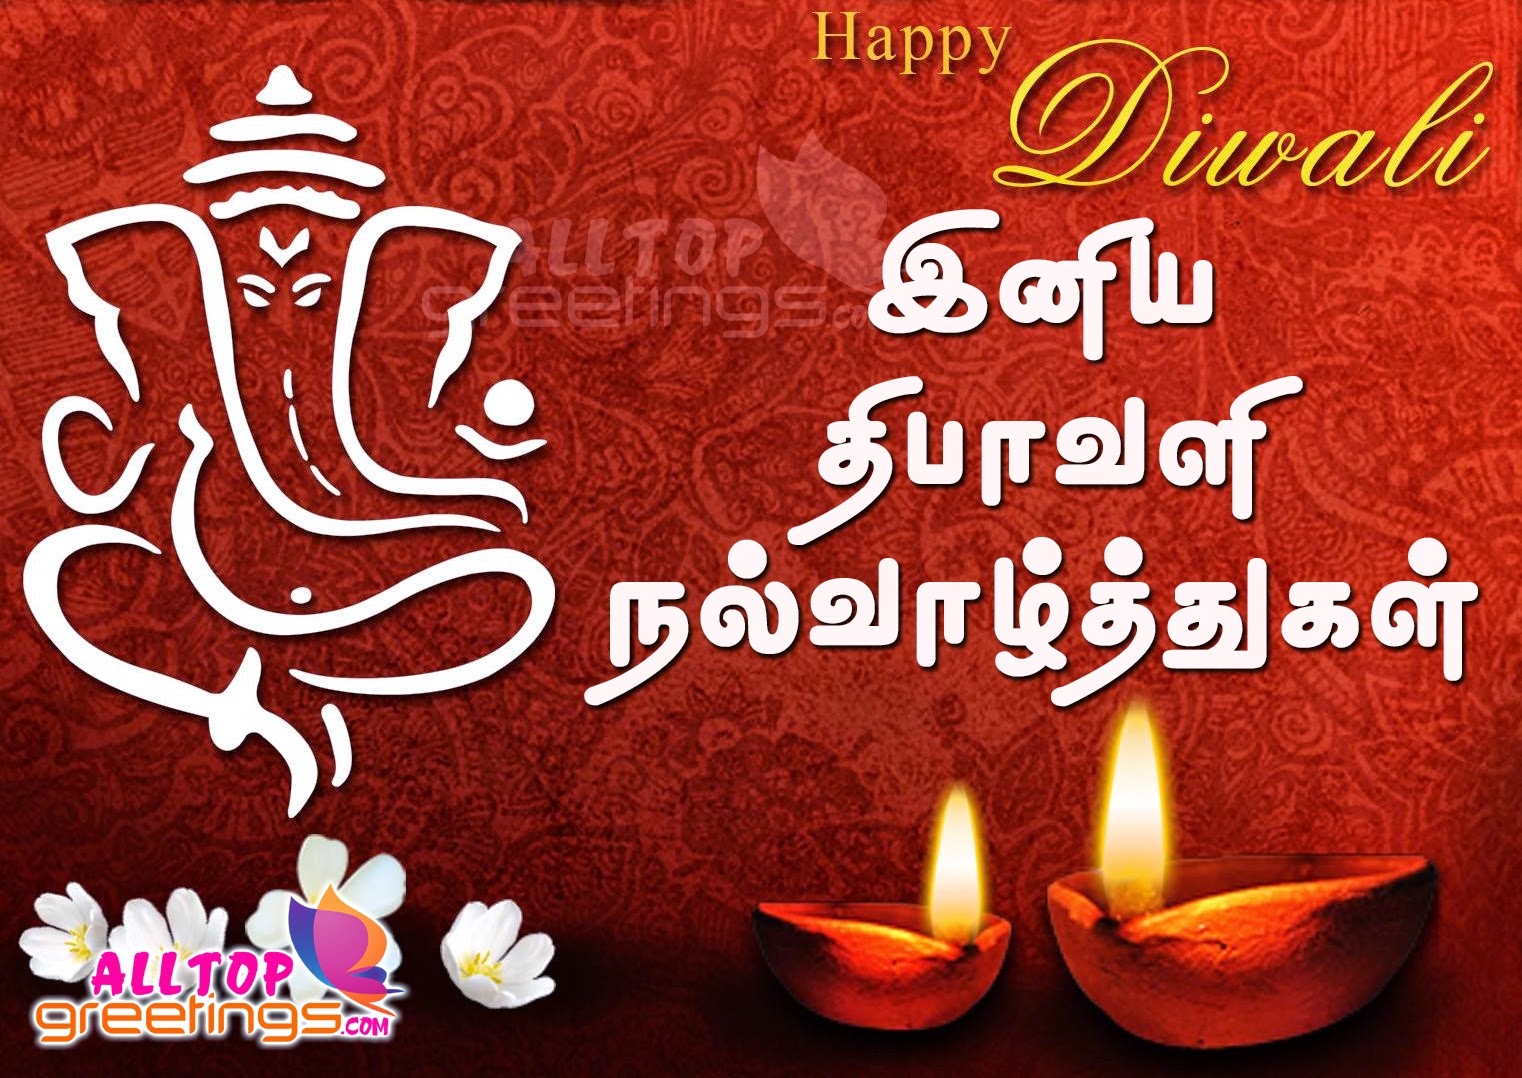 Deepavali 2014 Wishes in Tamil Language - All Top ...